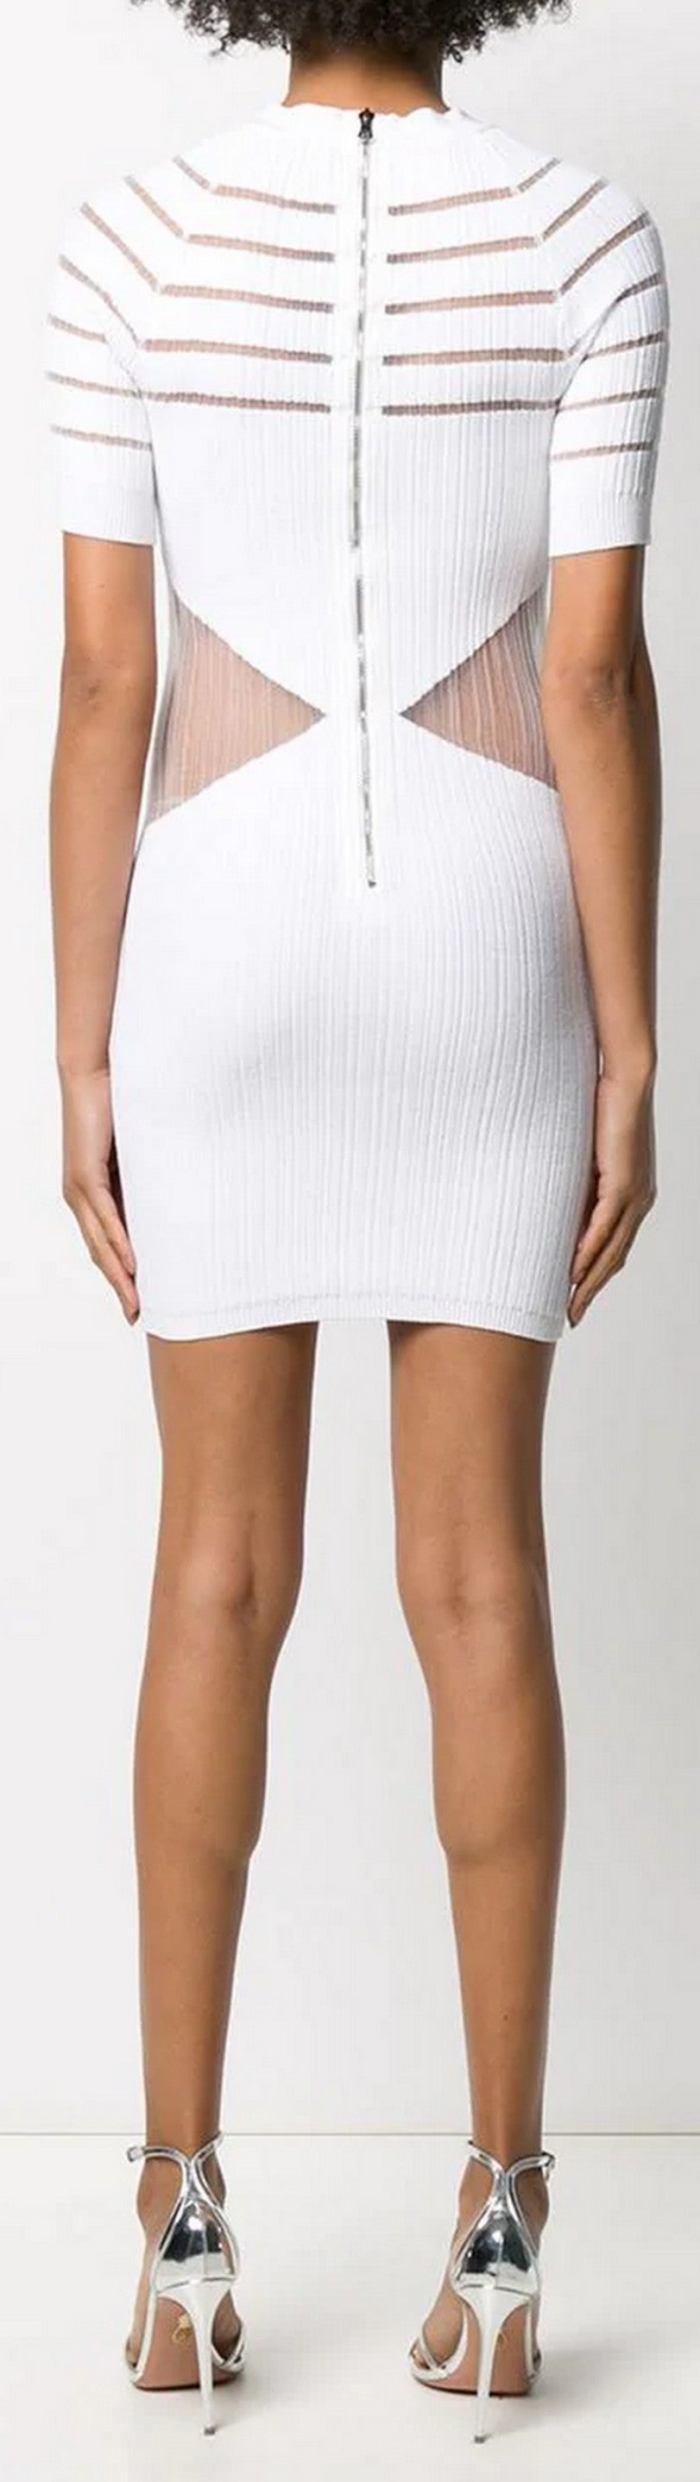 Cut-Out Detail Knit Dress, White DESIGNER INSPIRED FASHIONS